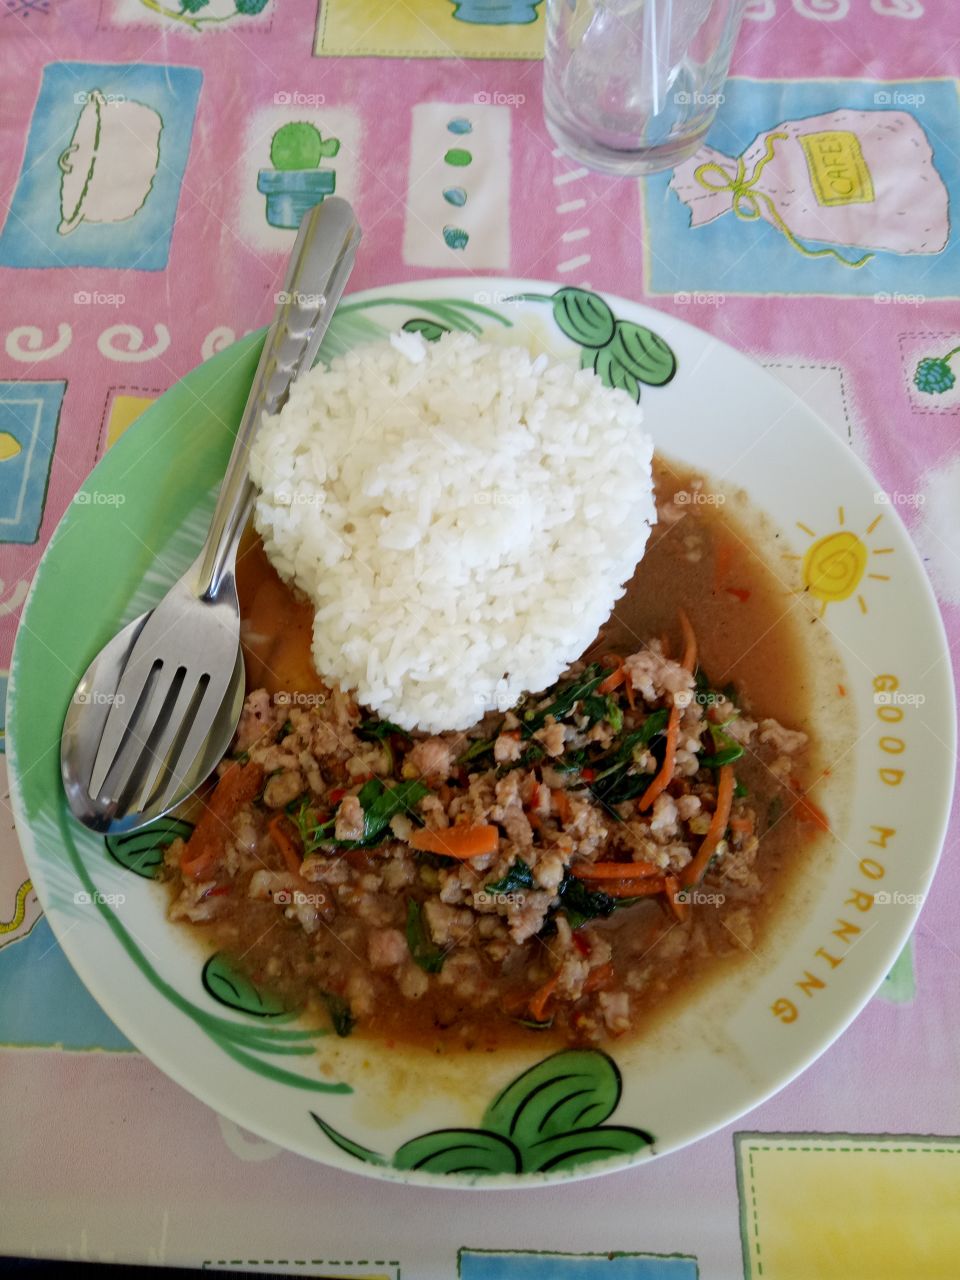 Thai food - Rice topped with stir-fried pork and basil